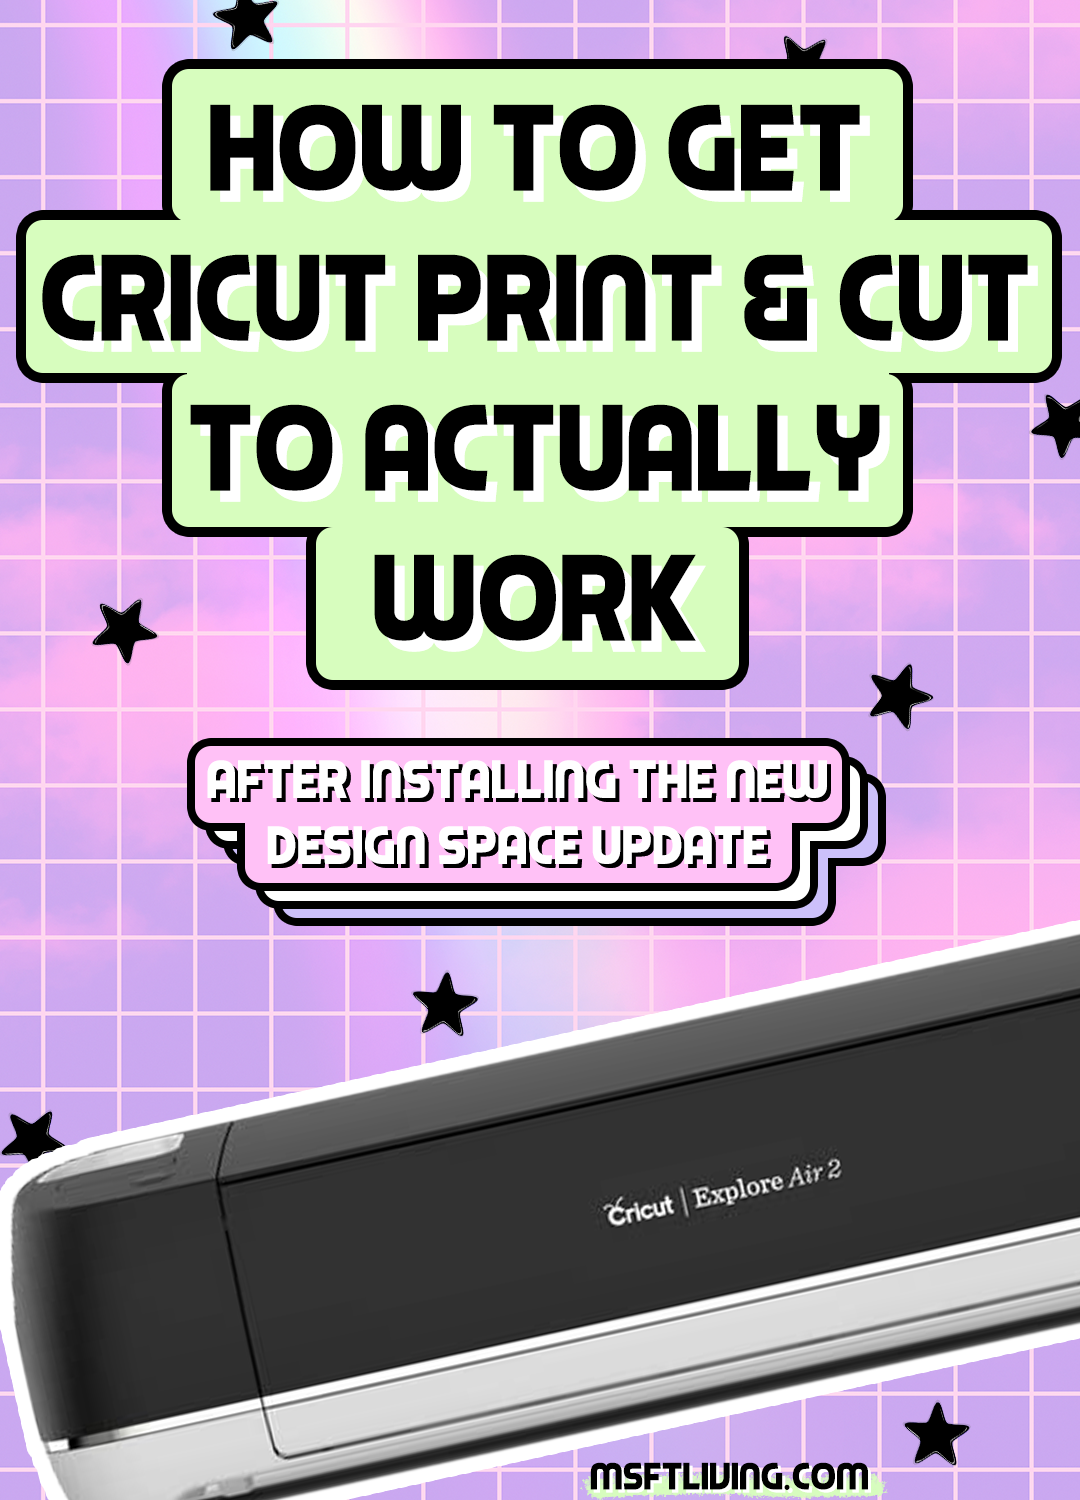 how-to-make-the-cricut-print-cut-function-actually-work-post-2021-6